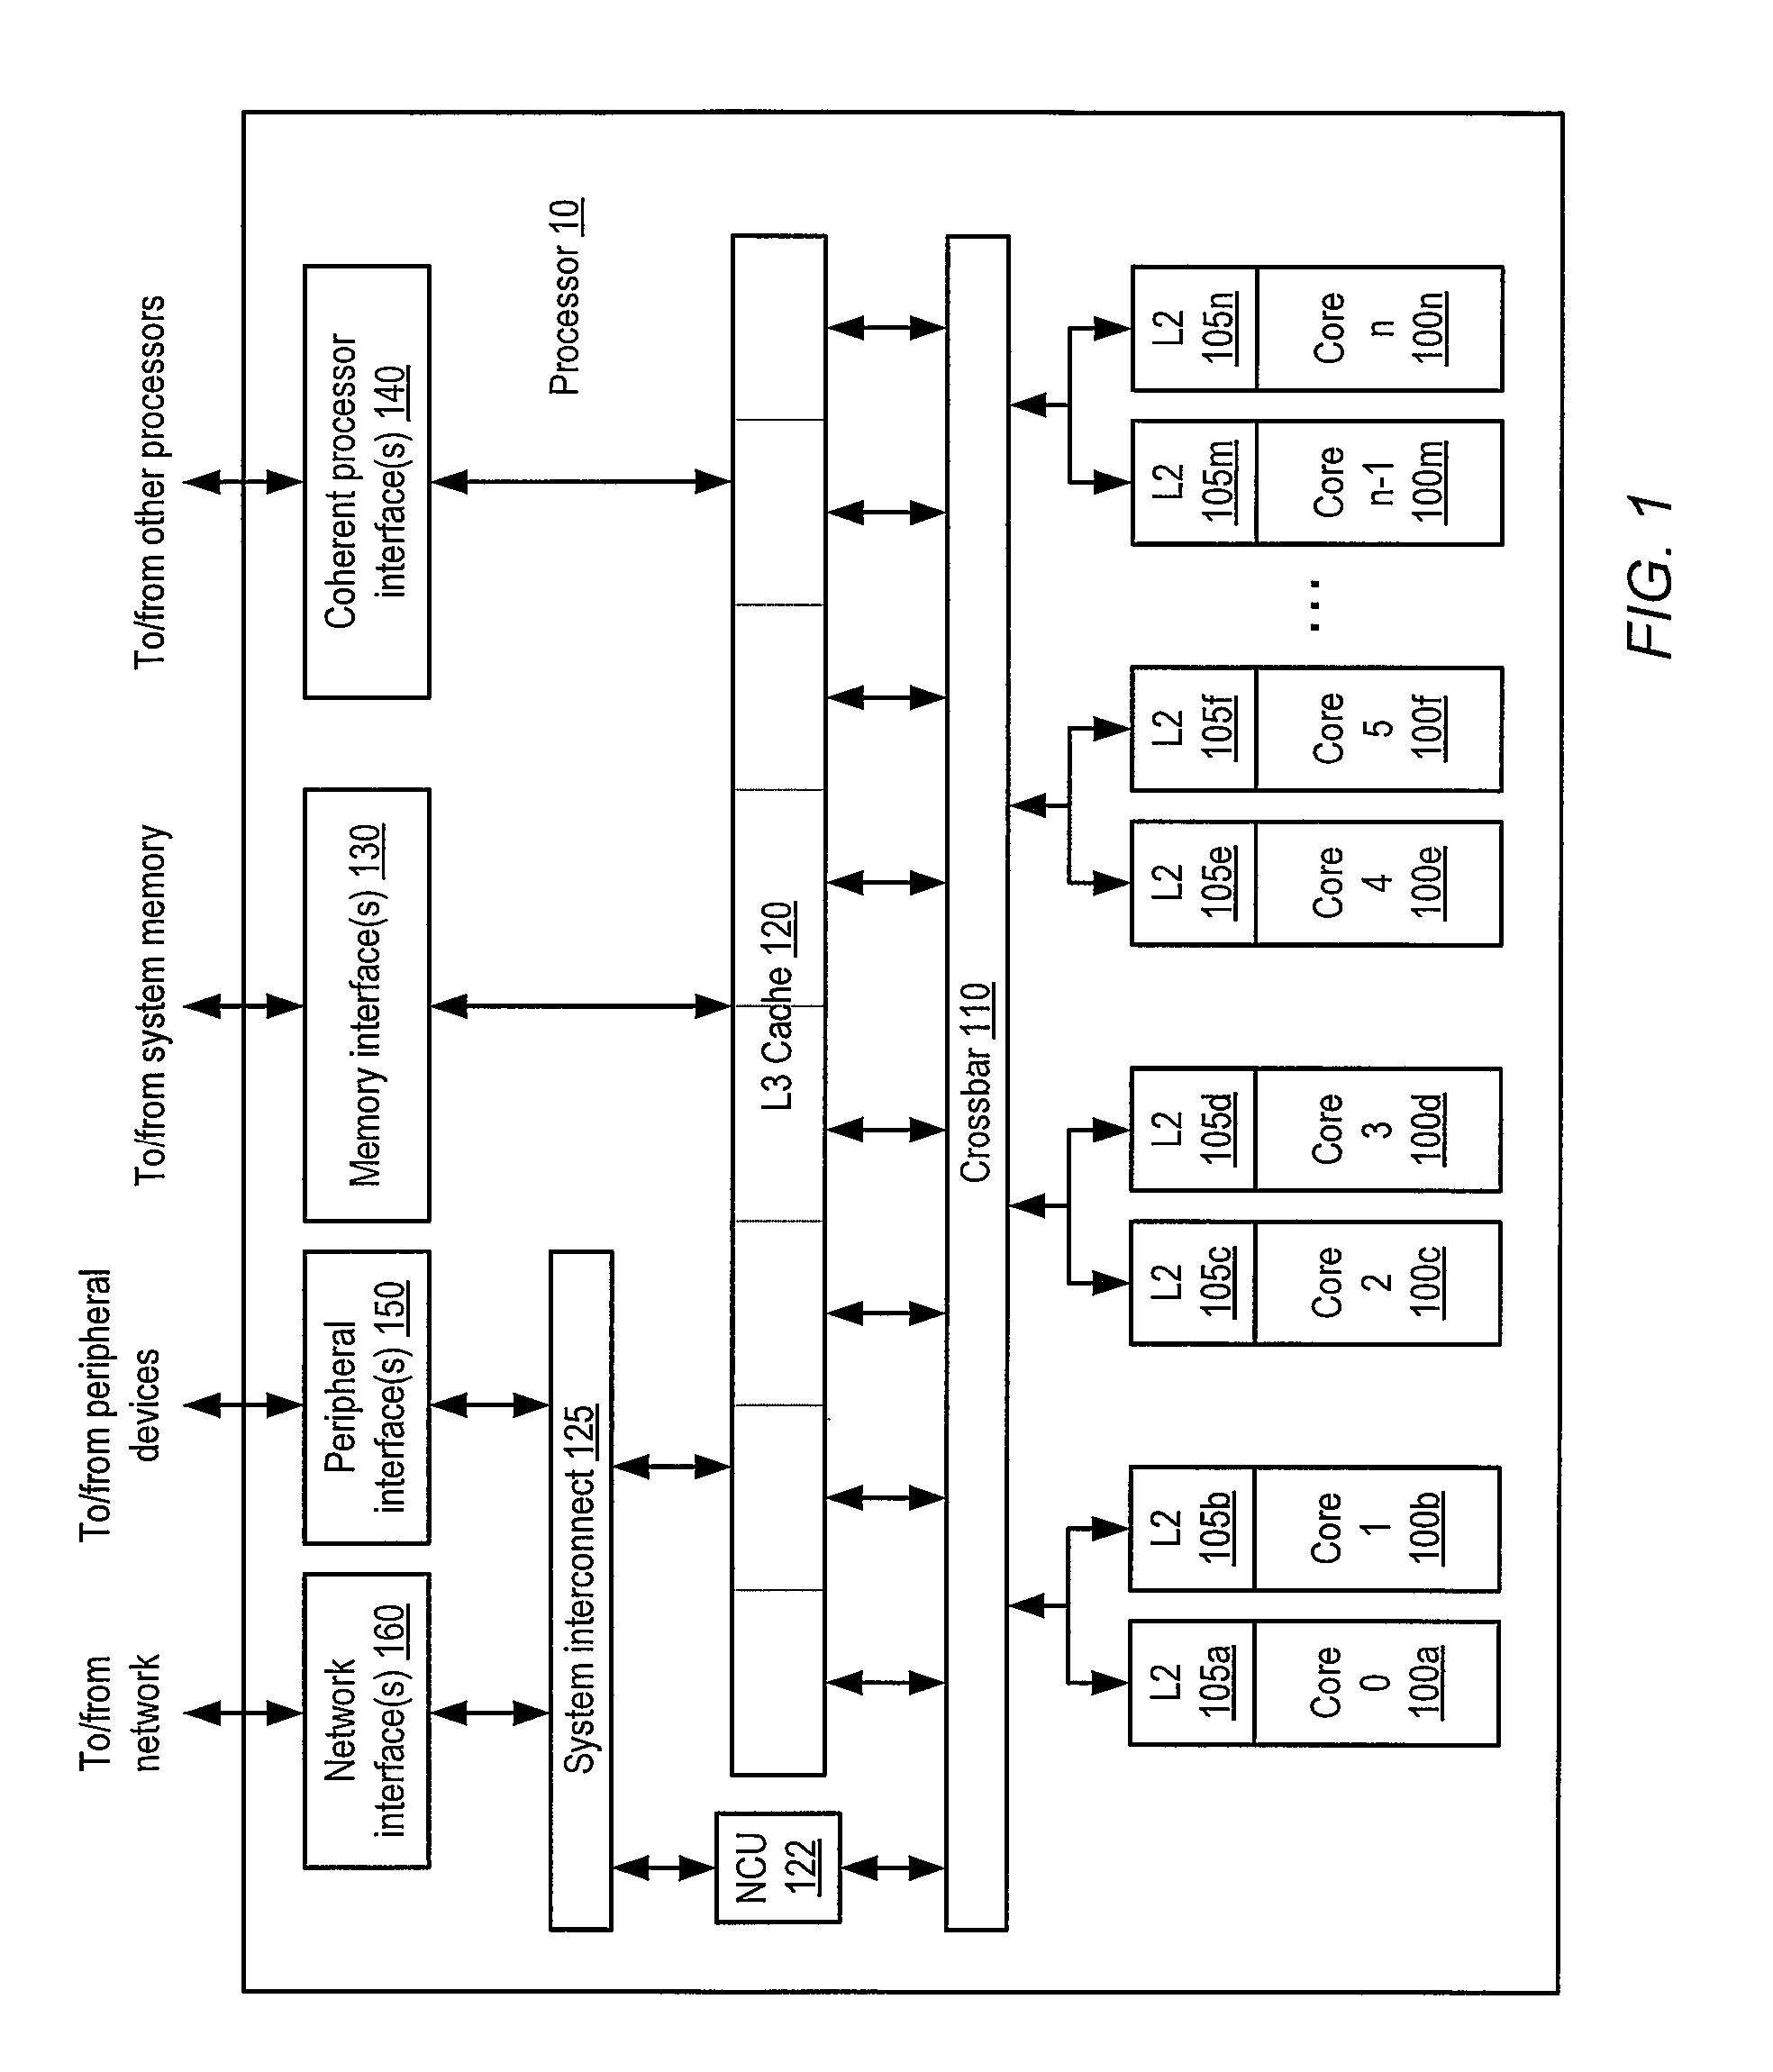 Apparatus and method for implementing instruction support for the data encryption standard (DES) algorithm